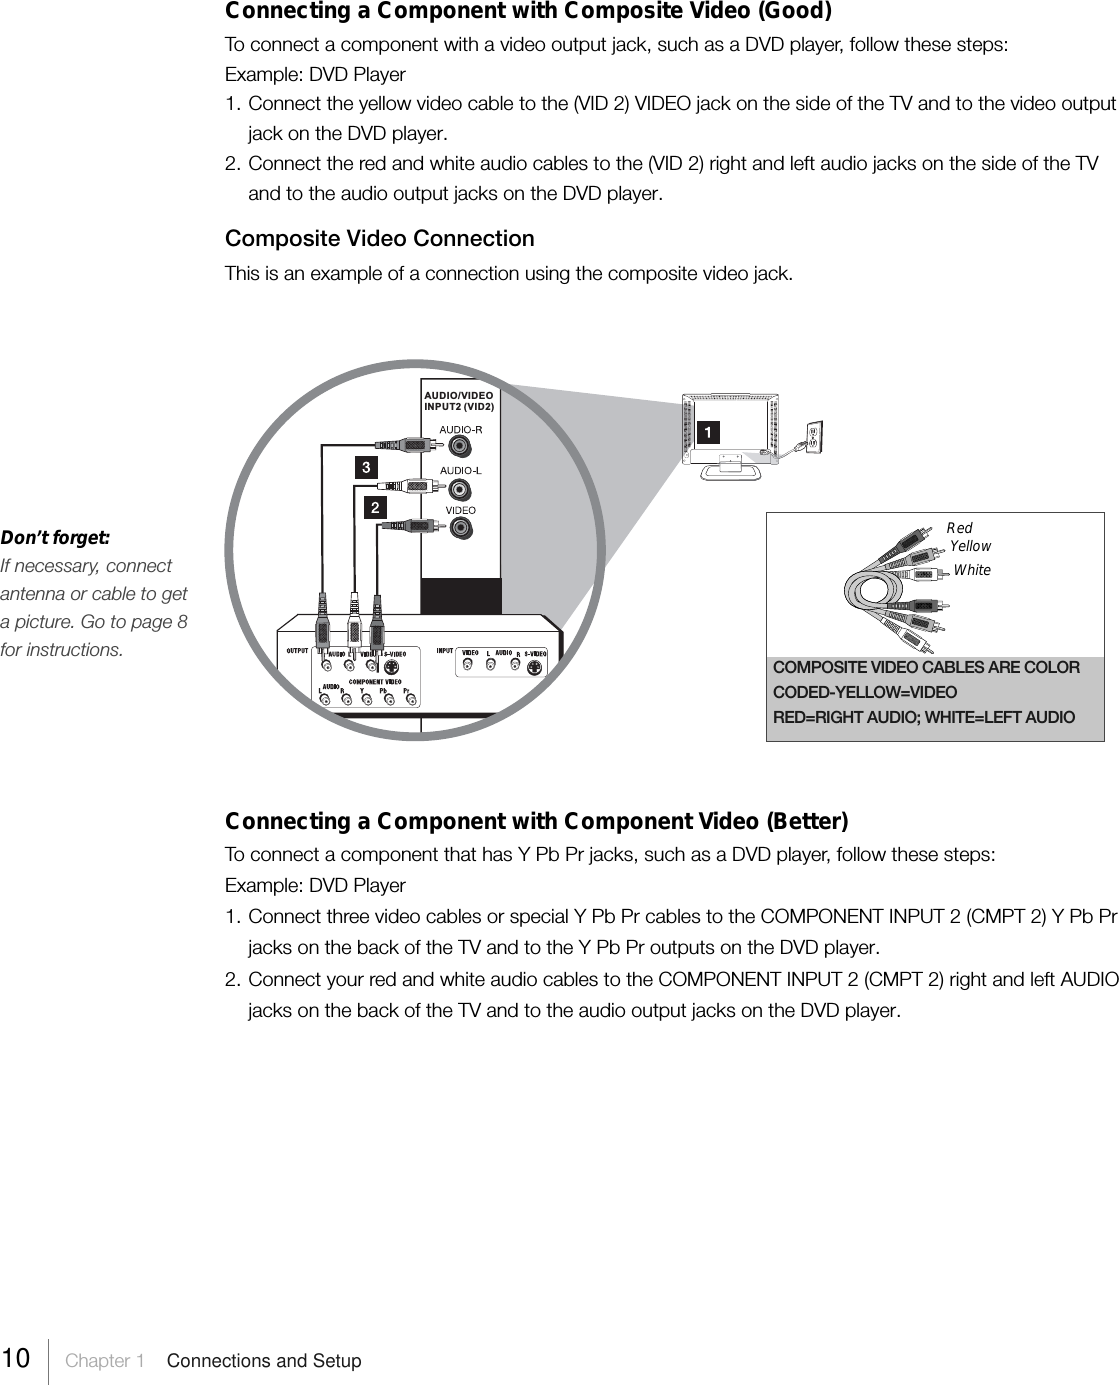 Don’t forget:If necessary, connectantenna or cable to geta picture. Go to page 8for instructions.Connecting a Component with Composite Video (Good)To connect a component with a video output jack, such as a DVD player, follow these steps:Example: DVD Player1. Connect the yellow video cable to the (VID 2) VIDEO jack on the side of the TV and to the video outputjack on the DVD player.2. Connect the red and white audio cables to the (VID 2) right and left audio jacks on the side of the TVand to the audio output jacks on the DVD player.Composite Video ConnectionThis is an example of a connection using the composite video jack.Connecting a Component with Component Video (Better)To connect a component that has Y Pb Pr jacks, such as a DVD player, follow these steps:Example: DVD Player1. Connect three video cables or special Y Pb Pr cables to the COMPONENT INPUT 2 (CMPT 2) Y Pb Prjacks on the back of the TV and to the Y Pb Pr outputs on the DVD player.2. Connect your red and white audio cables to the COMPONENT INPUT 2 (CMPT 2) right and left AUDIOjacks on the back of the TV and to the audio output jacks on the DVD player.AUDIO/VIDEOINPUT2 (VID2)10     Chapter 1    Connections and SetupCOMPOSITE VIDEO CABLES ARE COLORCODED-YELLOW=VIDEORED=RIGHT AUDIO; WHITE=LEFT AUDIORedYellowWhite